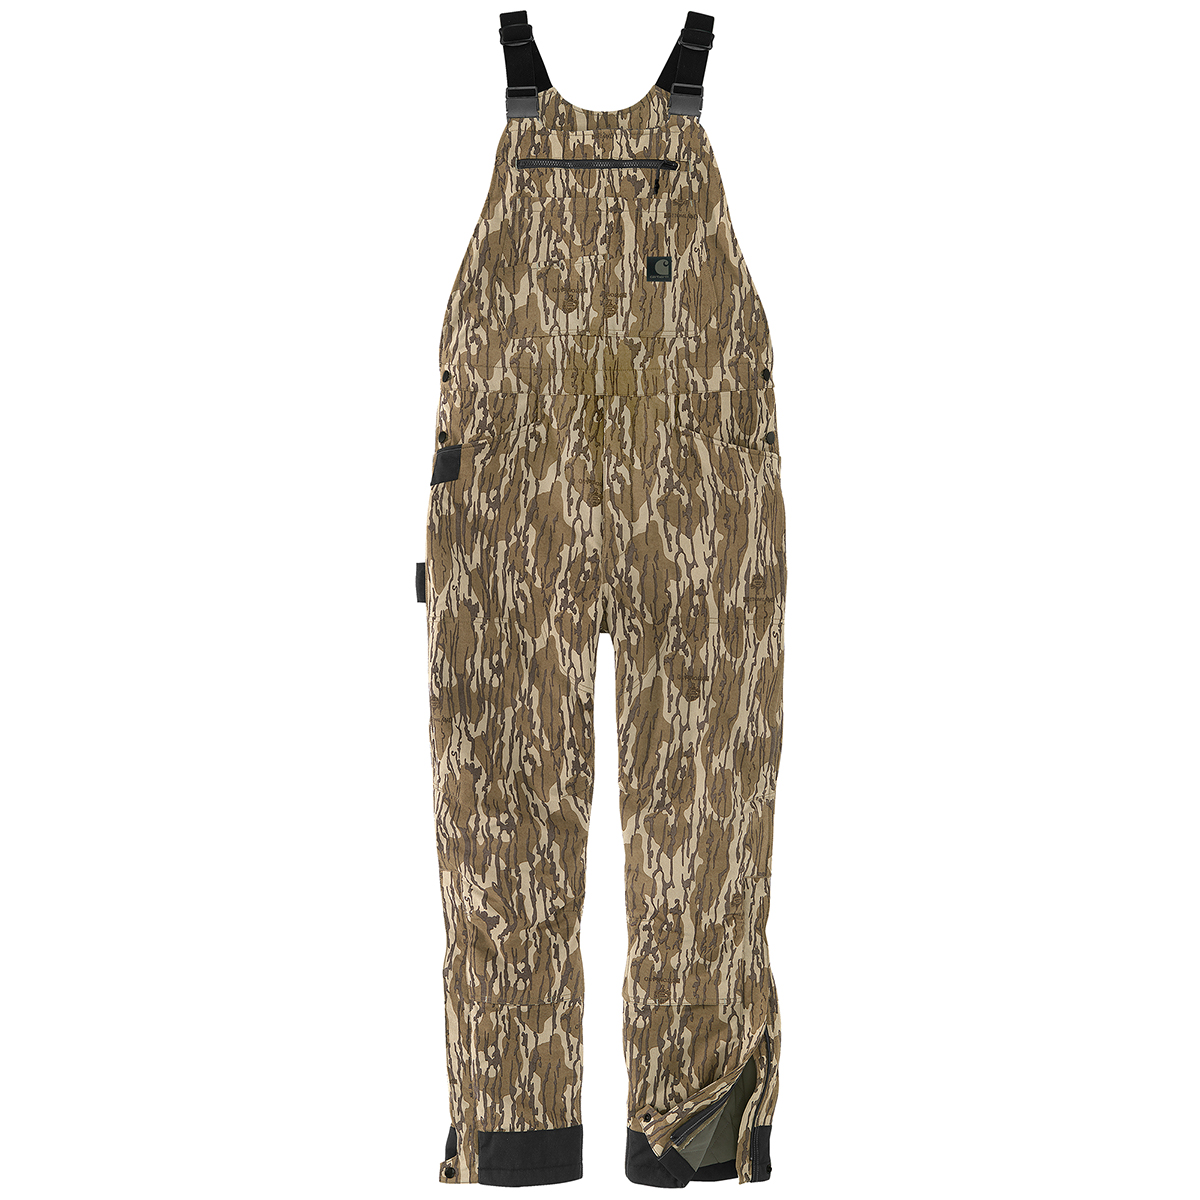 Carhartt Men's 105476 Super Dux Relaxed Fit Insulated Camo Bib Overall, Extended Sizes